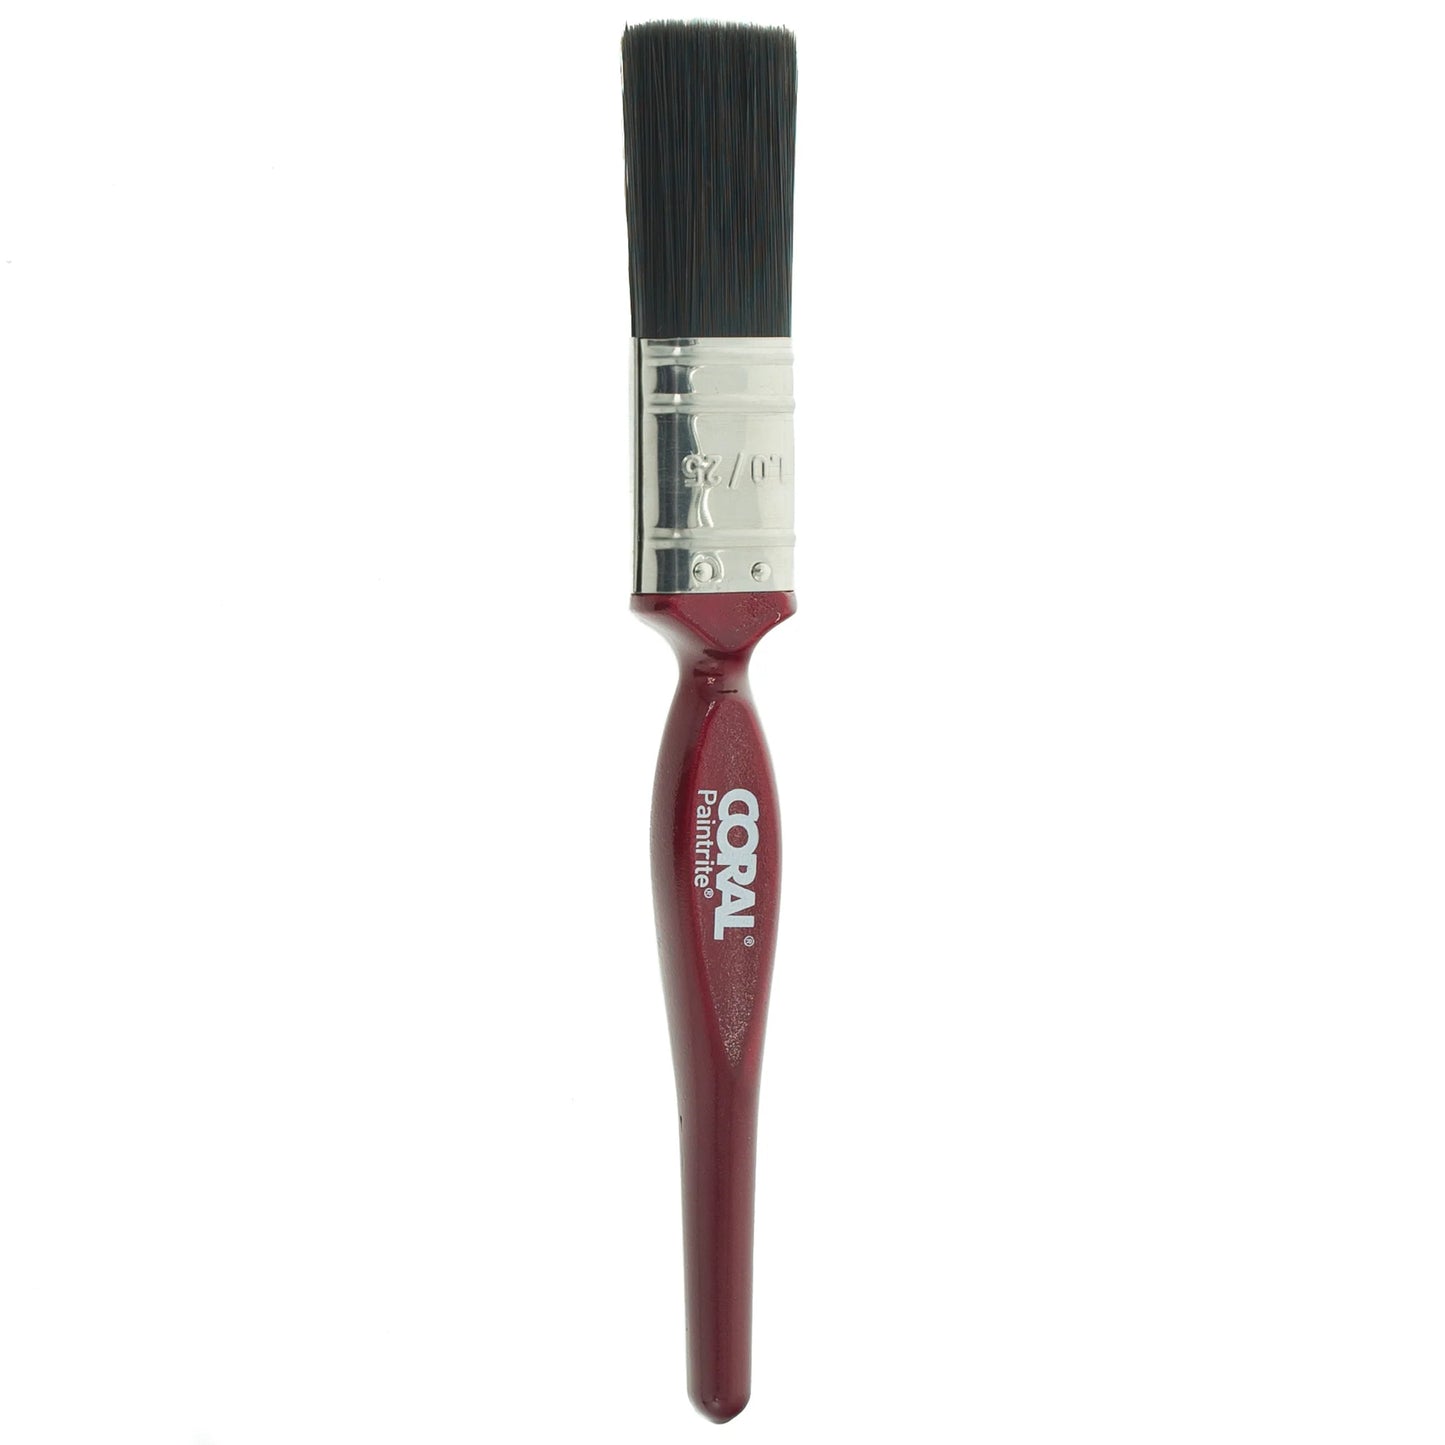 Paintrite Paint Brush 1" (25mm) by Coral Tools